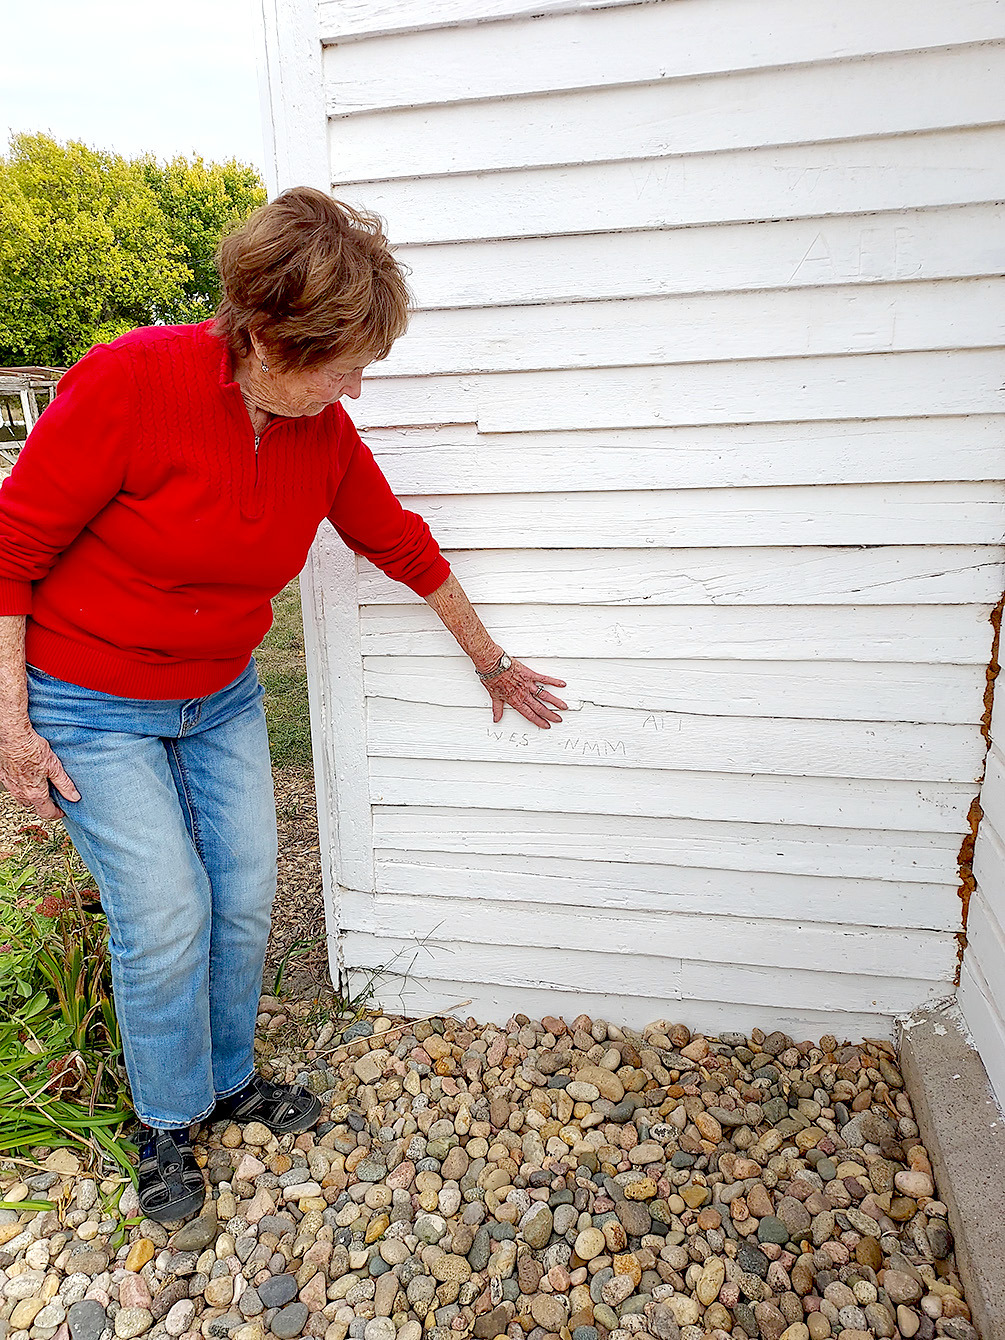 JOAN BALDERSTON shows where her sister, Naomi May, carved her initials into the Prairie View schoolhouse many years ago. The school resides on the Dawn and Jim O’Grady farm south of Stockton.